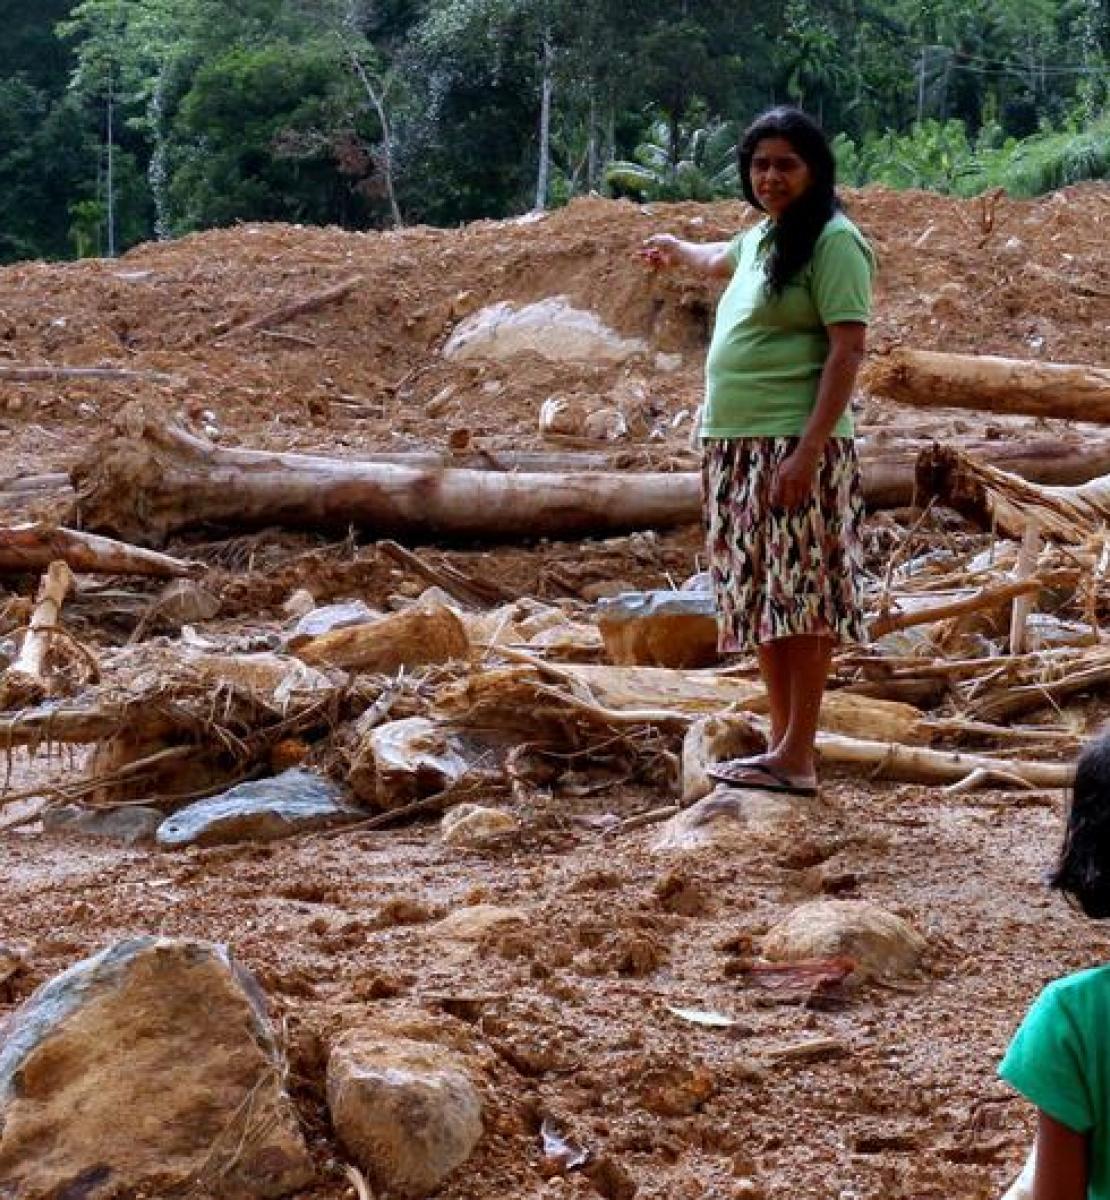 A woman in a mid-length skirt and t-shirt stands in a field of mud with tree trunk strewn around, talking to a young child.